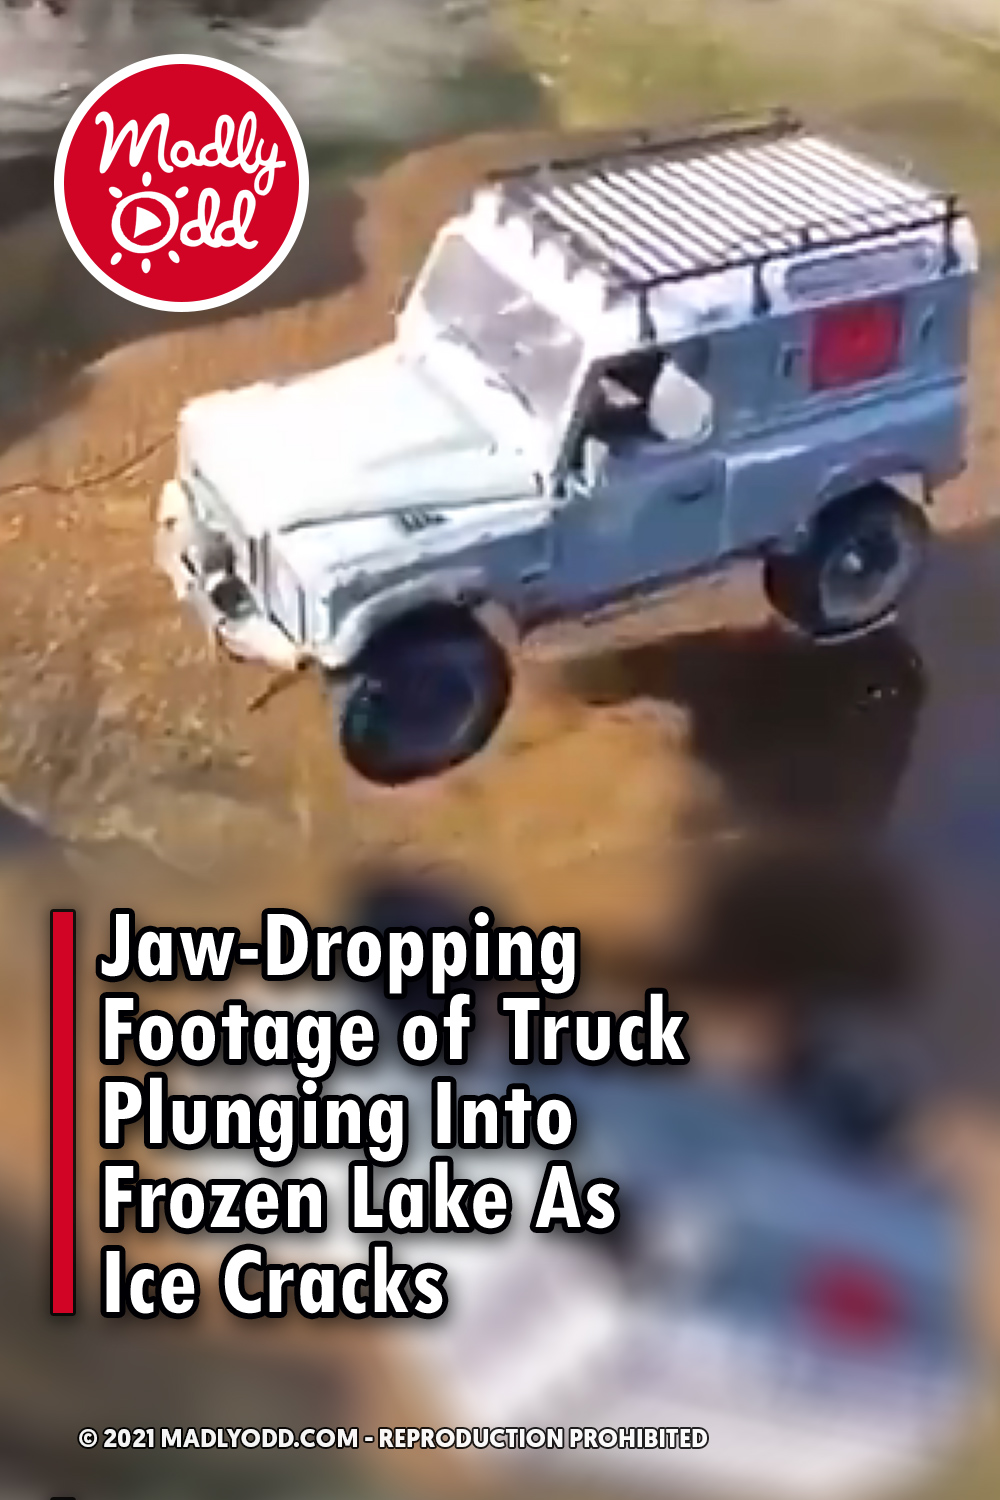 Jaw-Dropping Footage of Truck Plunging Into Frozen Lake As Ice Cracks